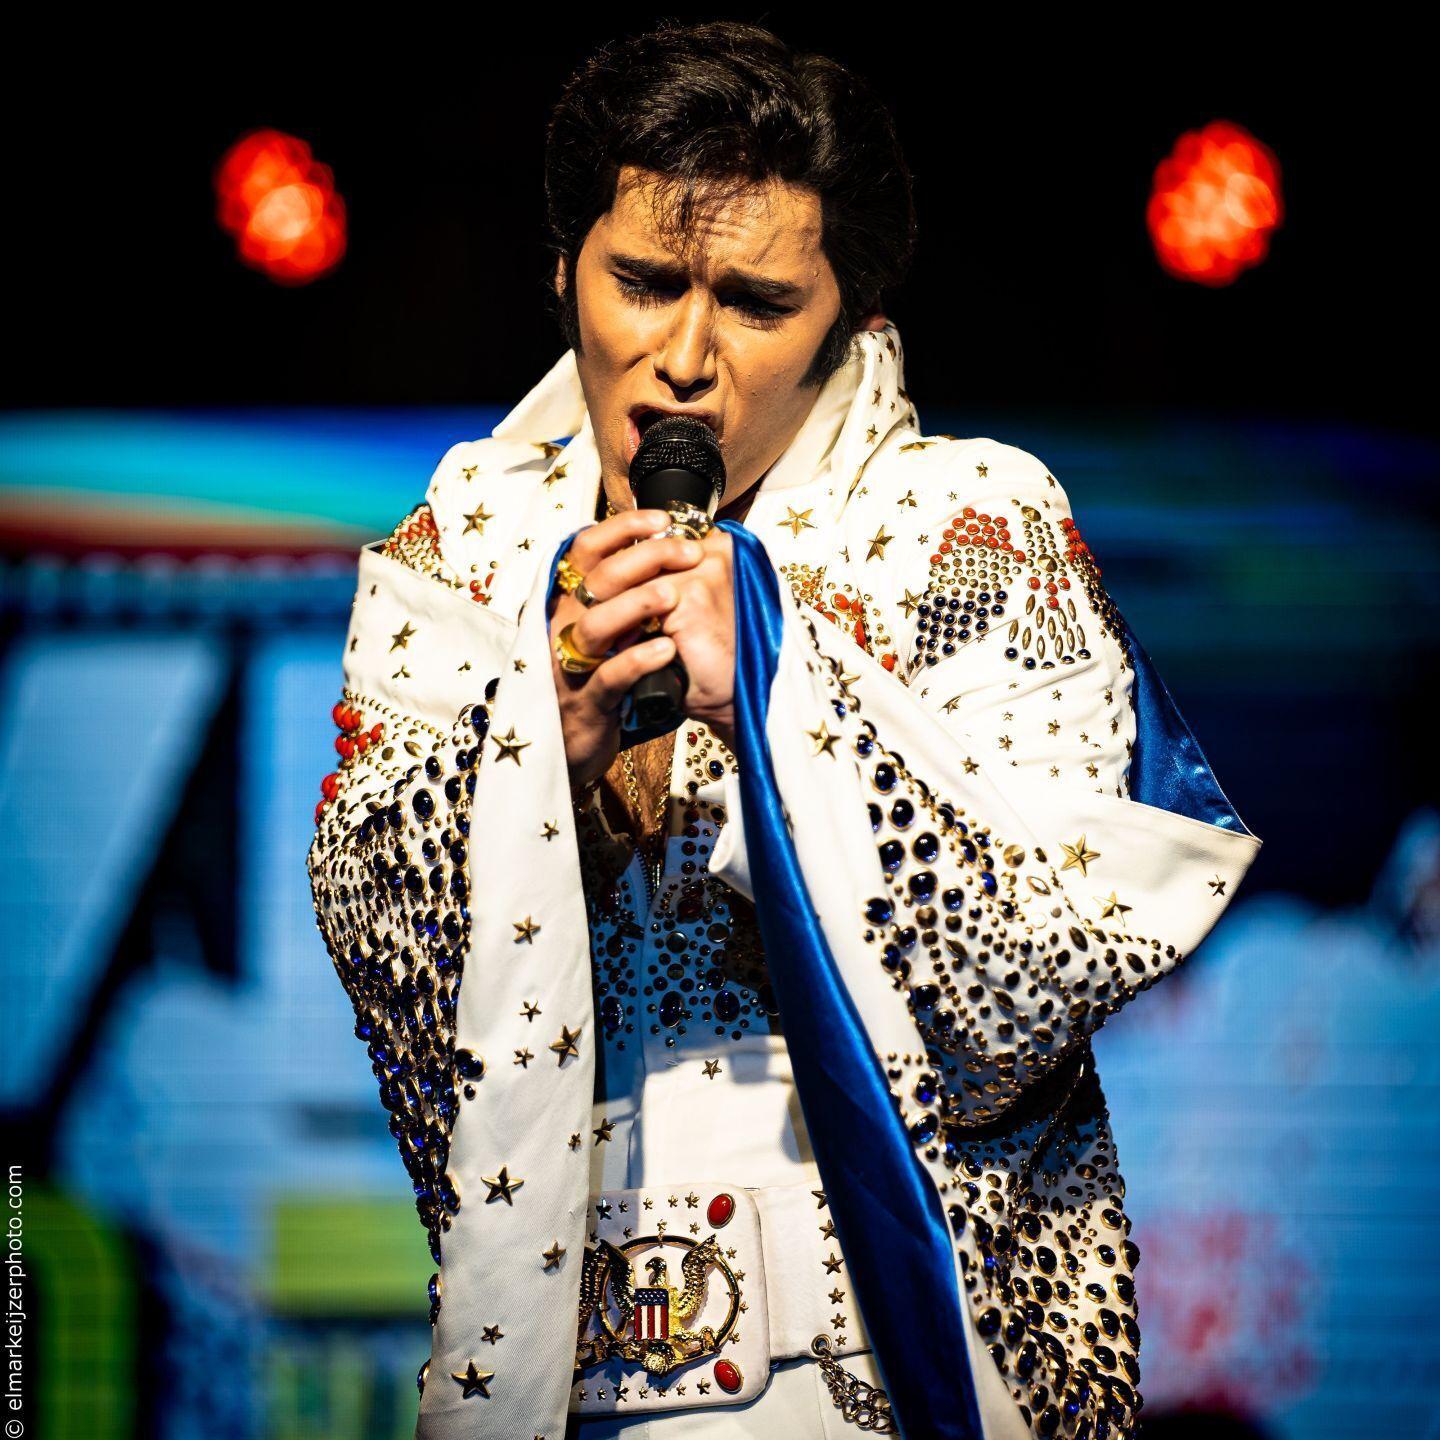 Elvis coming to Dunnellon